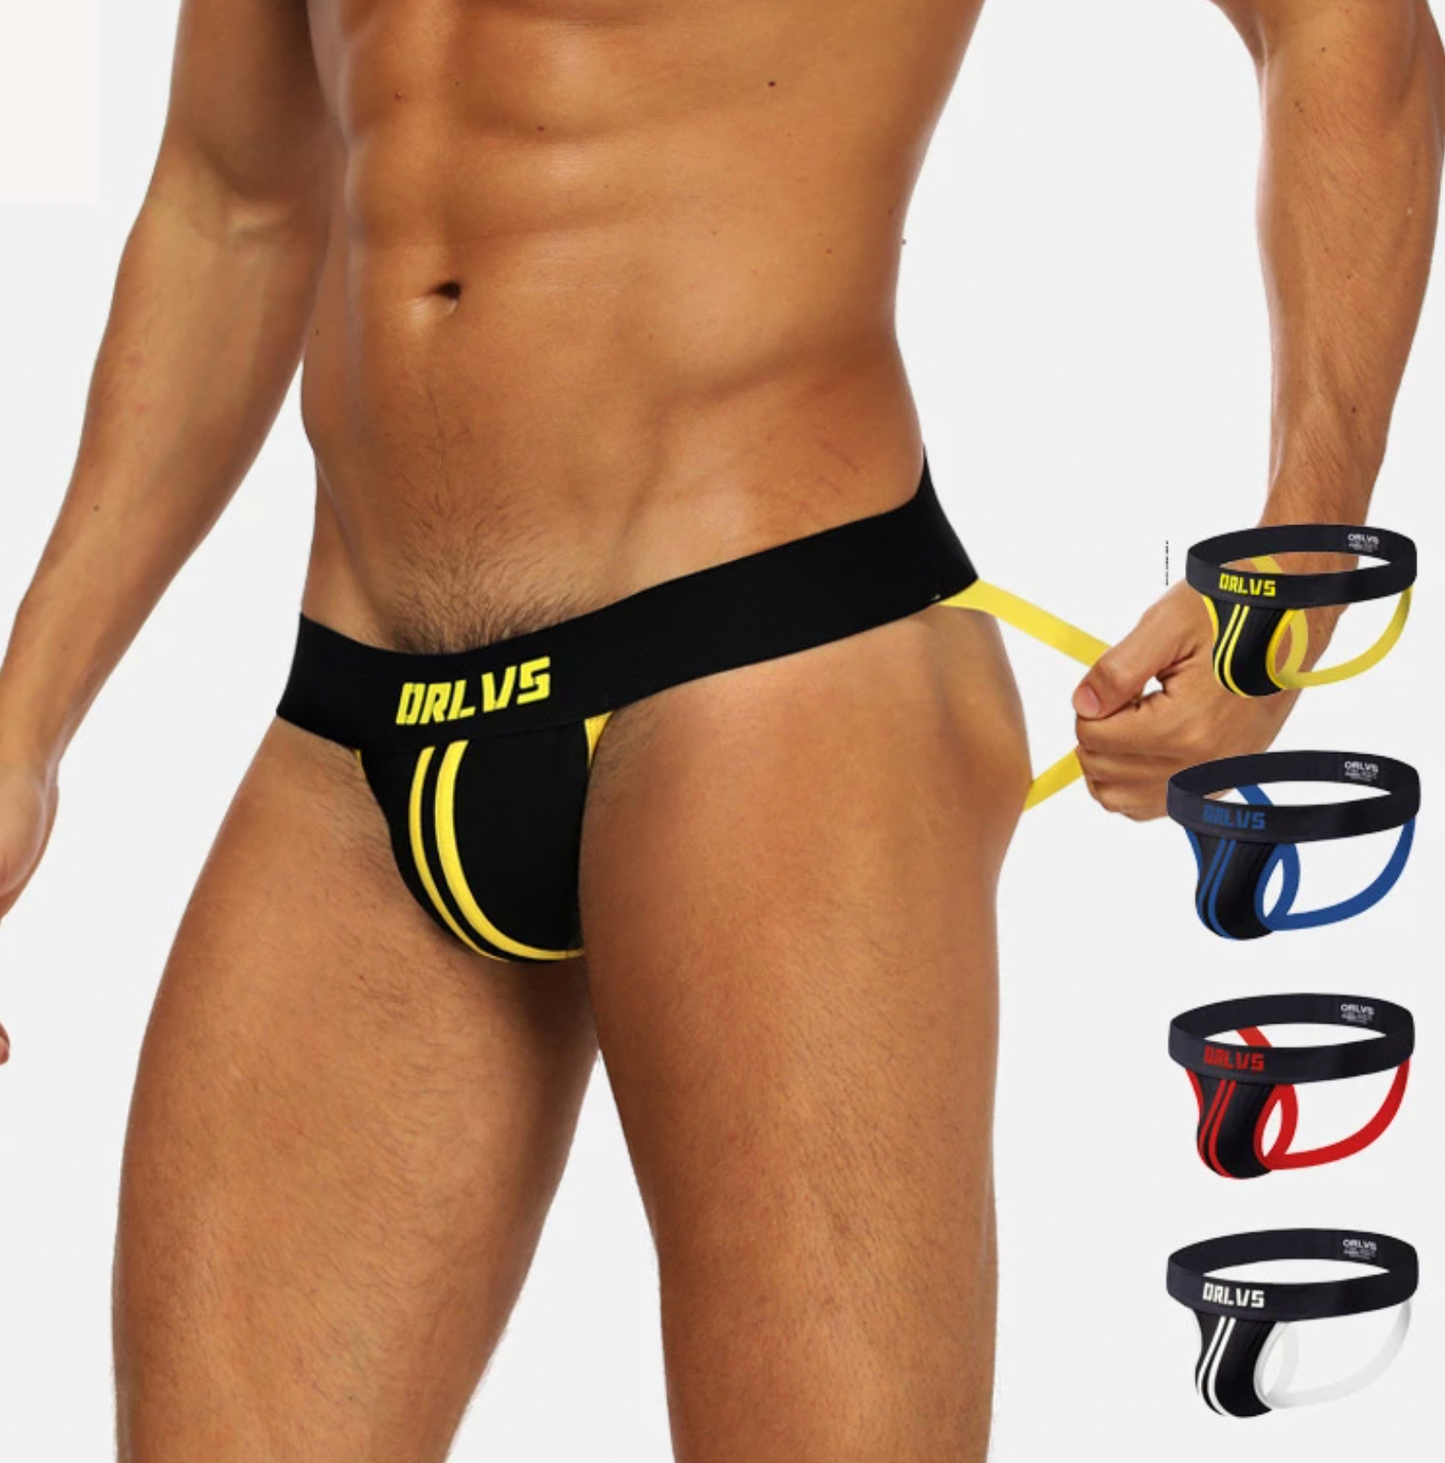 Striped Jockstrap - 25.99 with free shipping on Gays+ Store 